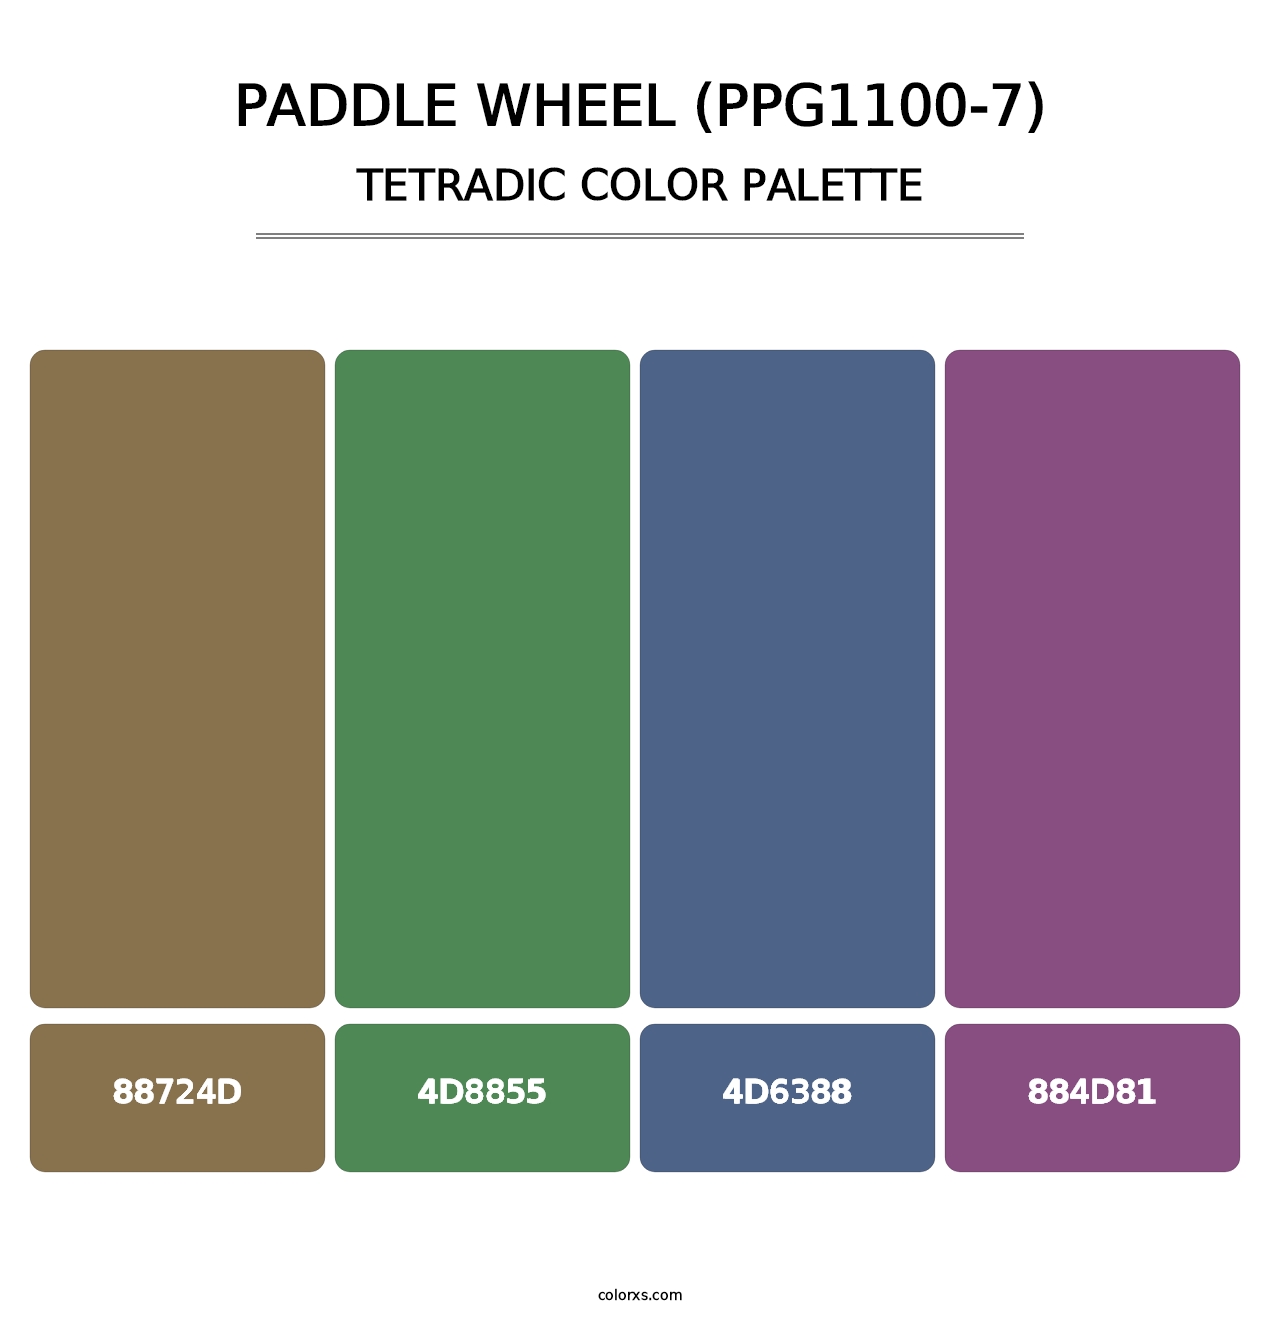 Paddle Wheel (PPG1100-7) - Tetradic Color Palette